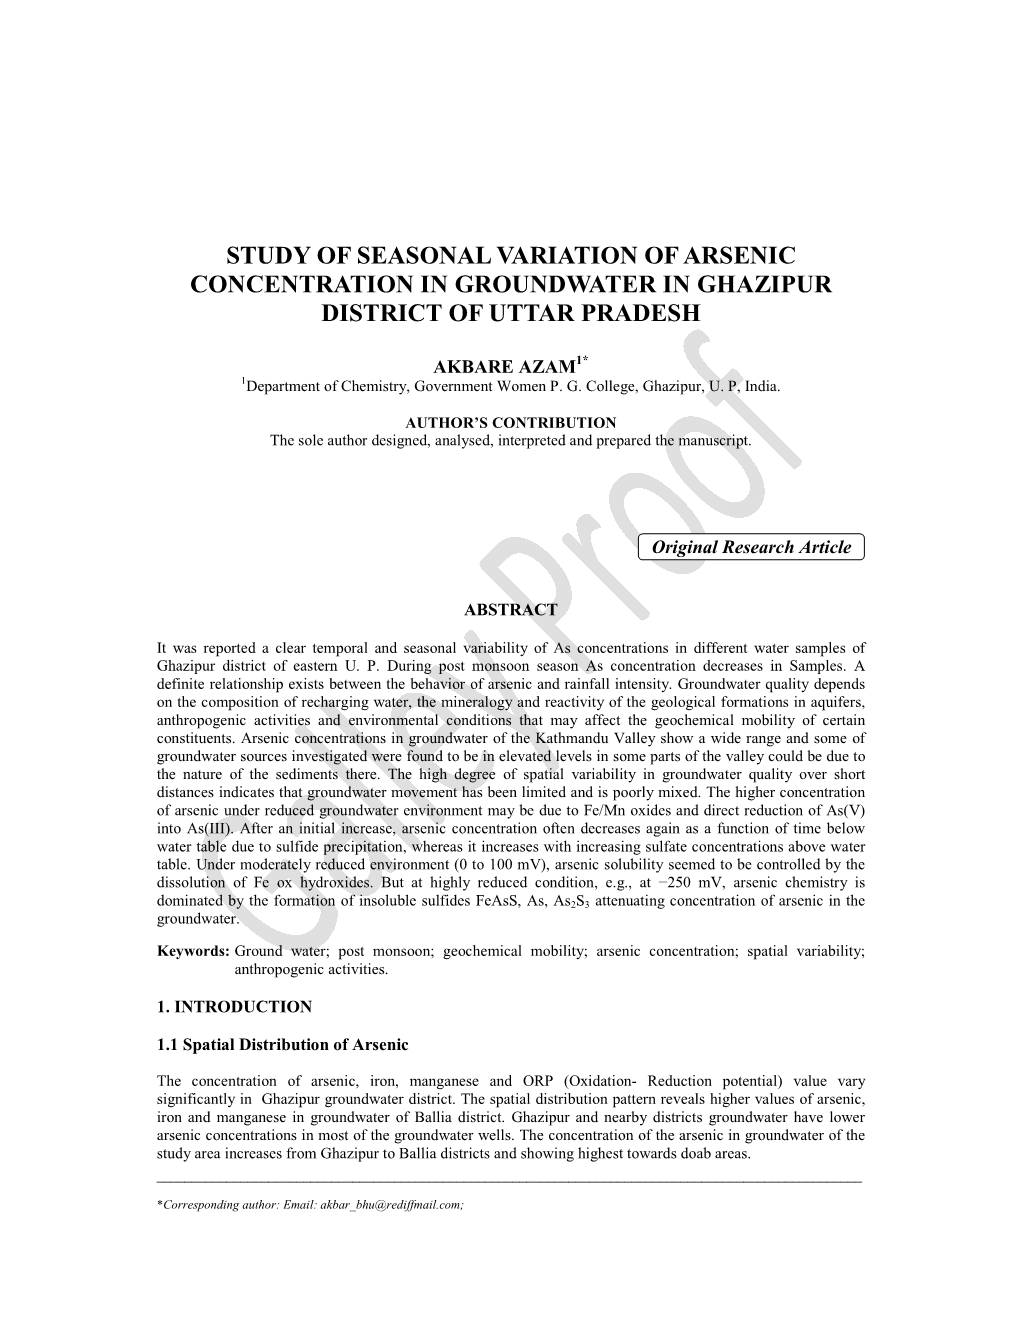 Study of Seasonal Variation of Arsenic Concentration in Groundwater in Ghazipur District of Uttar Pradesh